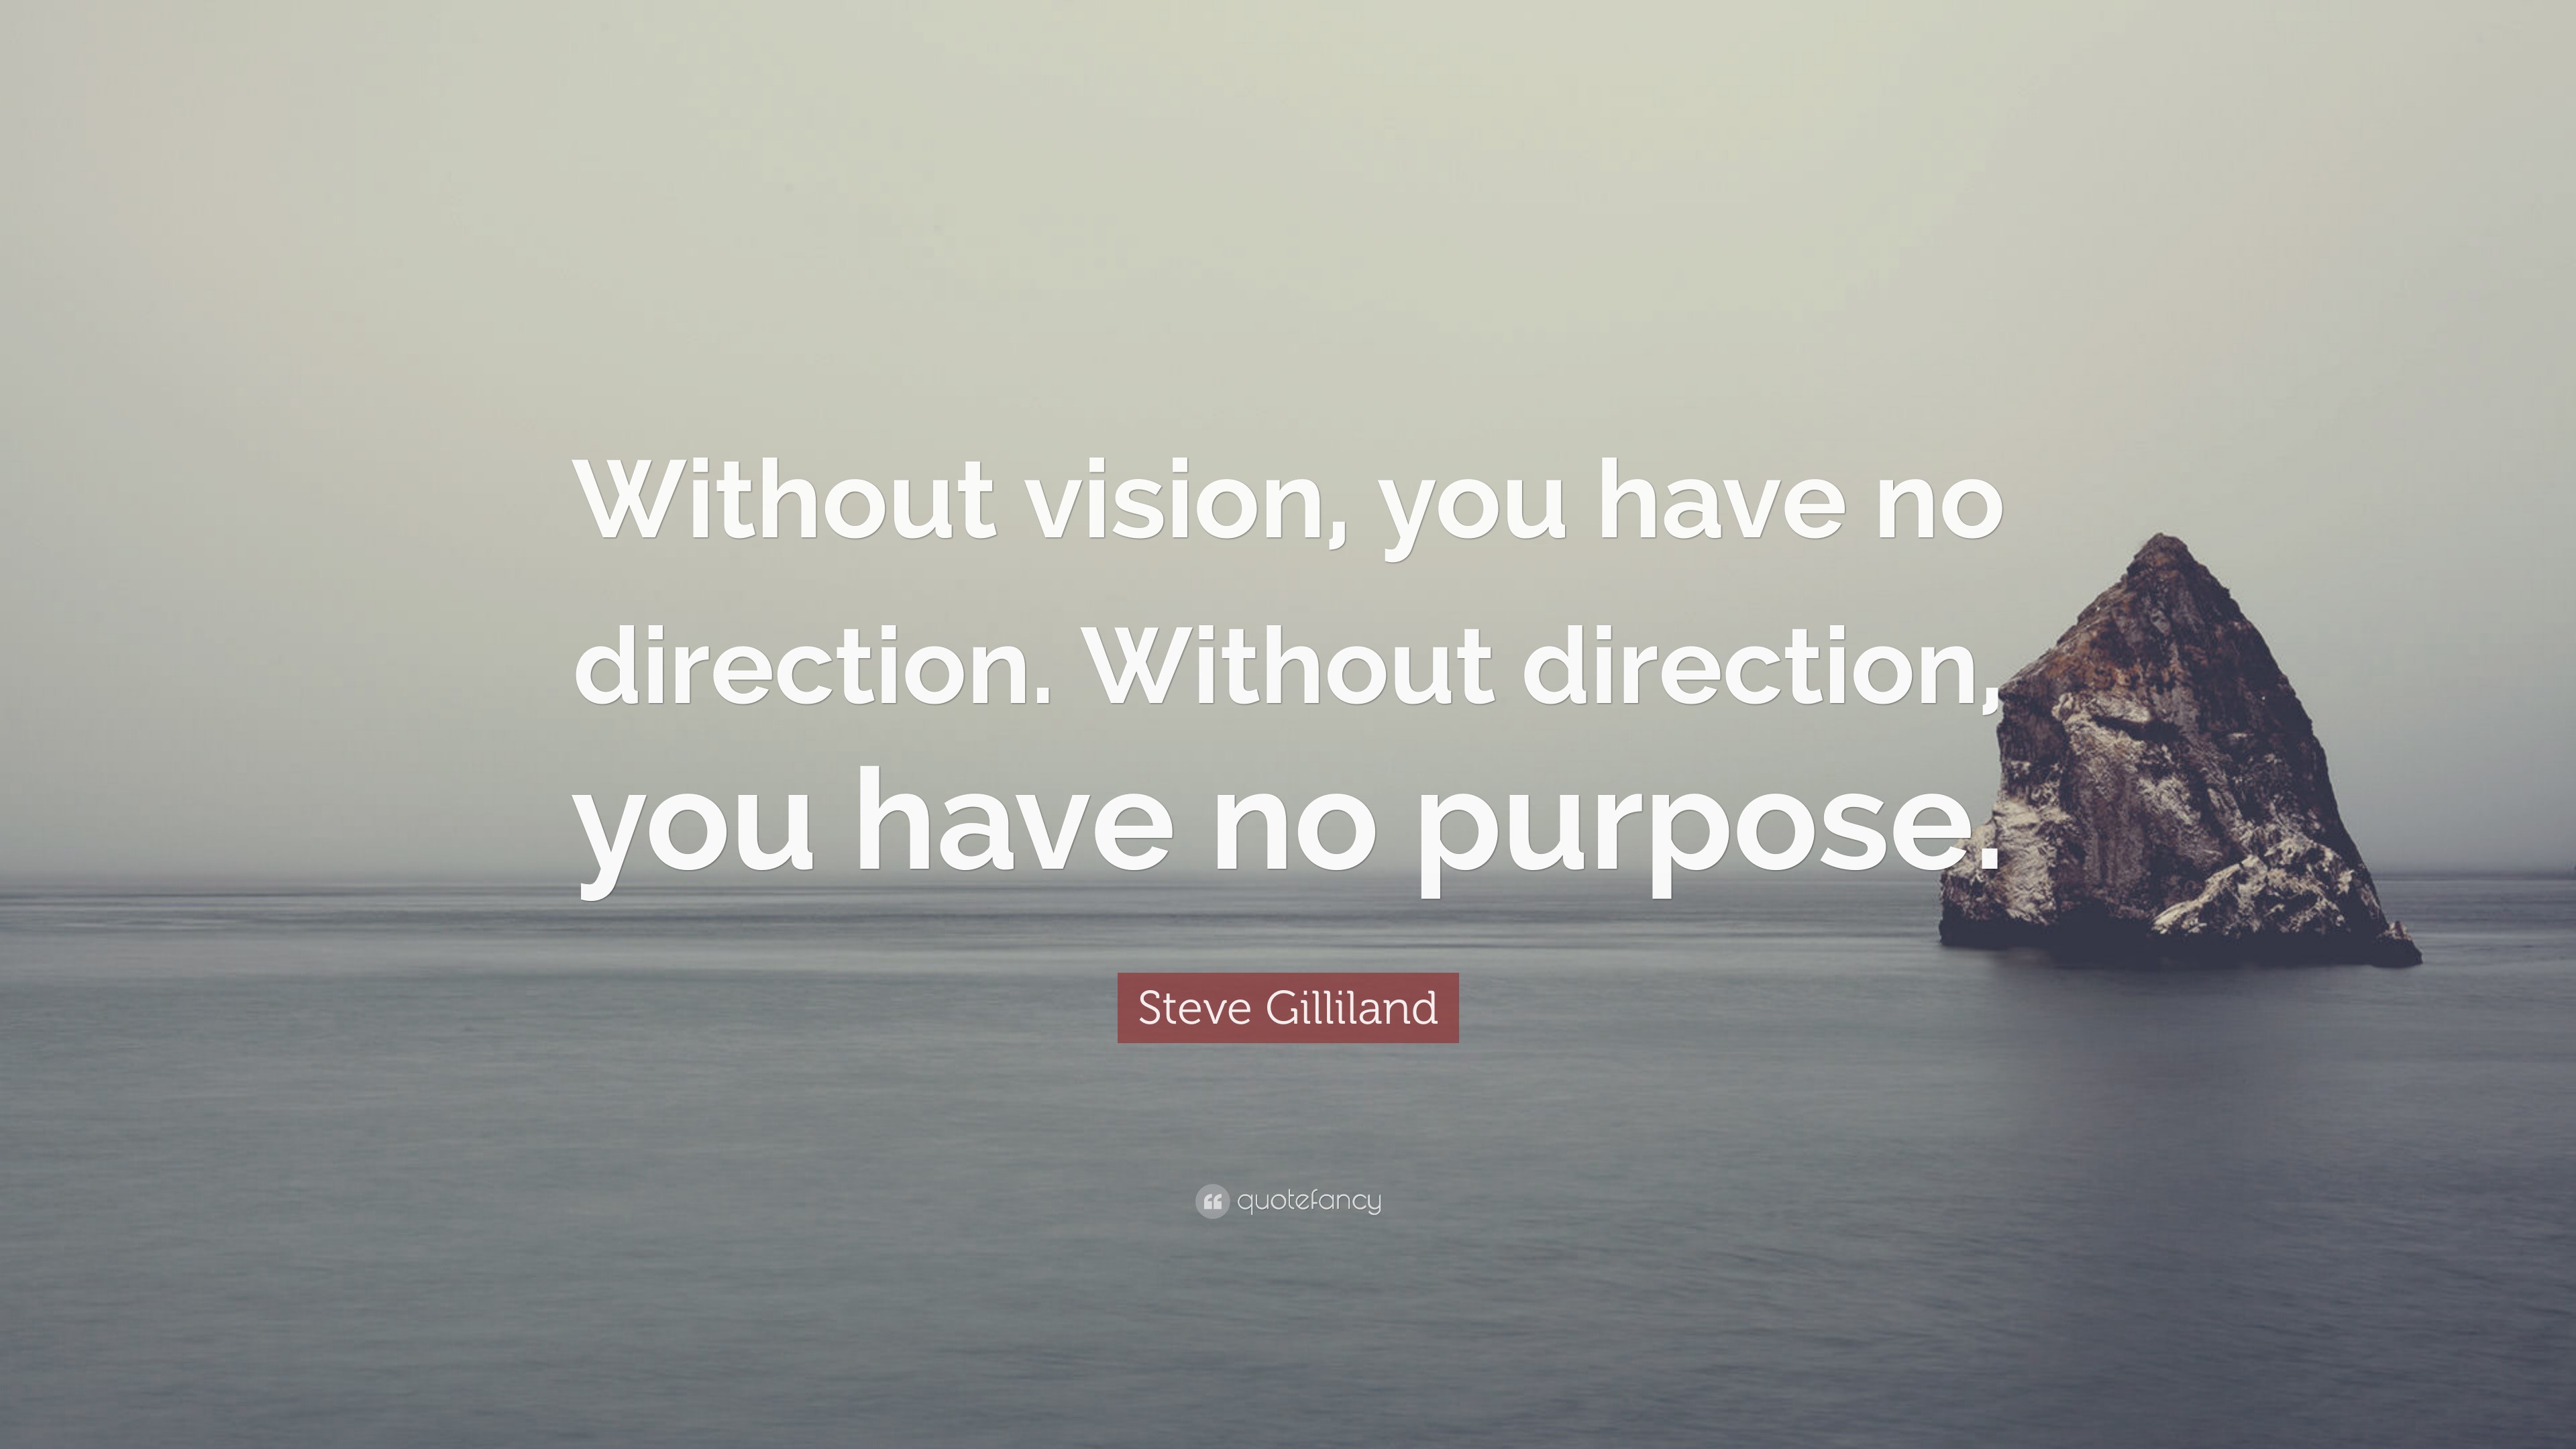 Steve Gilliland Quote: “Without vision, you have no direction. Without